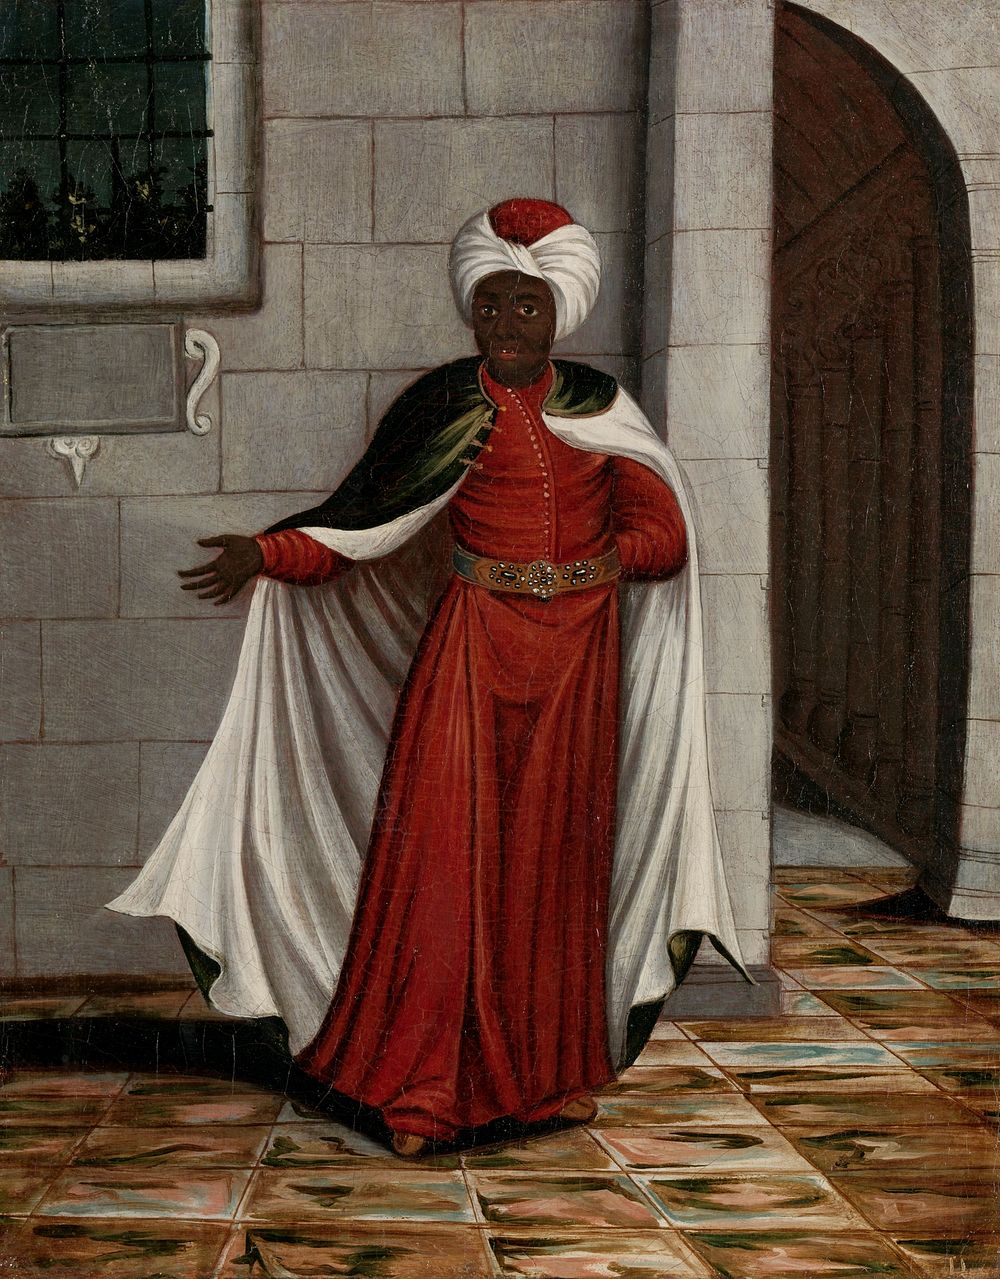 The Kislar Aghassi, Chief of the Black Eunuchs of the Sultan (1700 - 1737) by Jean Baptiste Vanmour